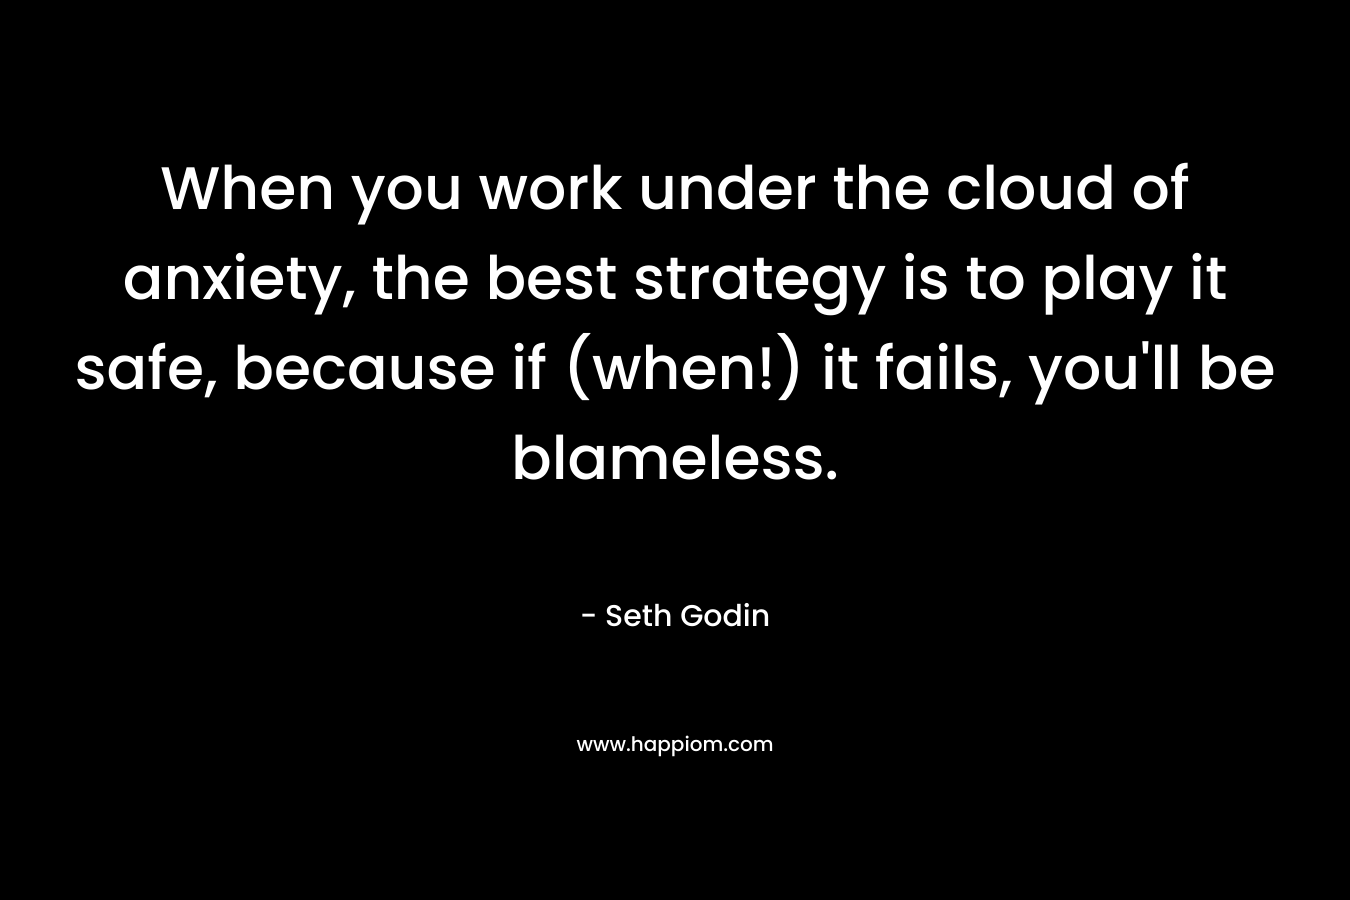 When you work under the cloud of anxiety, the best strategy is to play it safe, because if (when!) it fails, you'll be blameless.